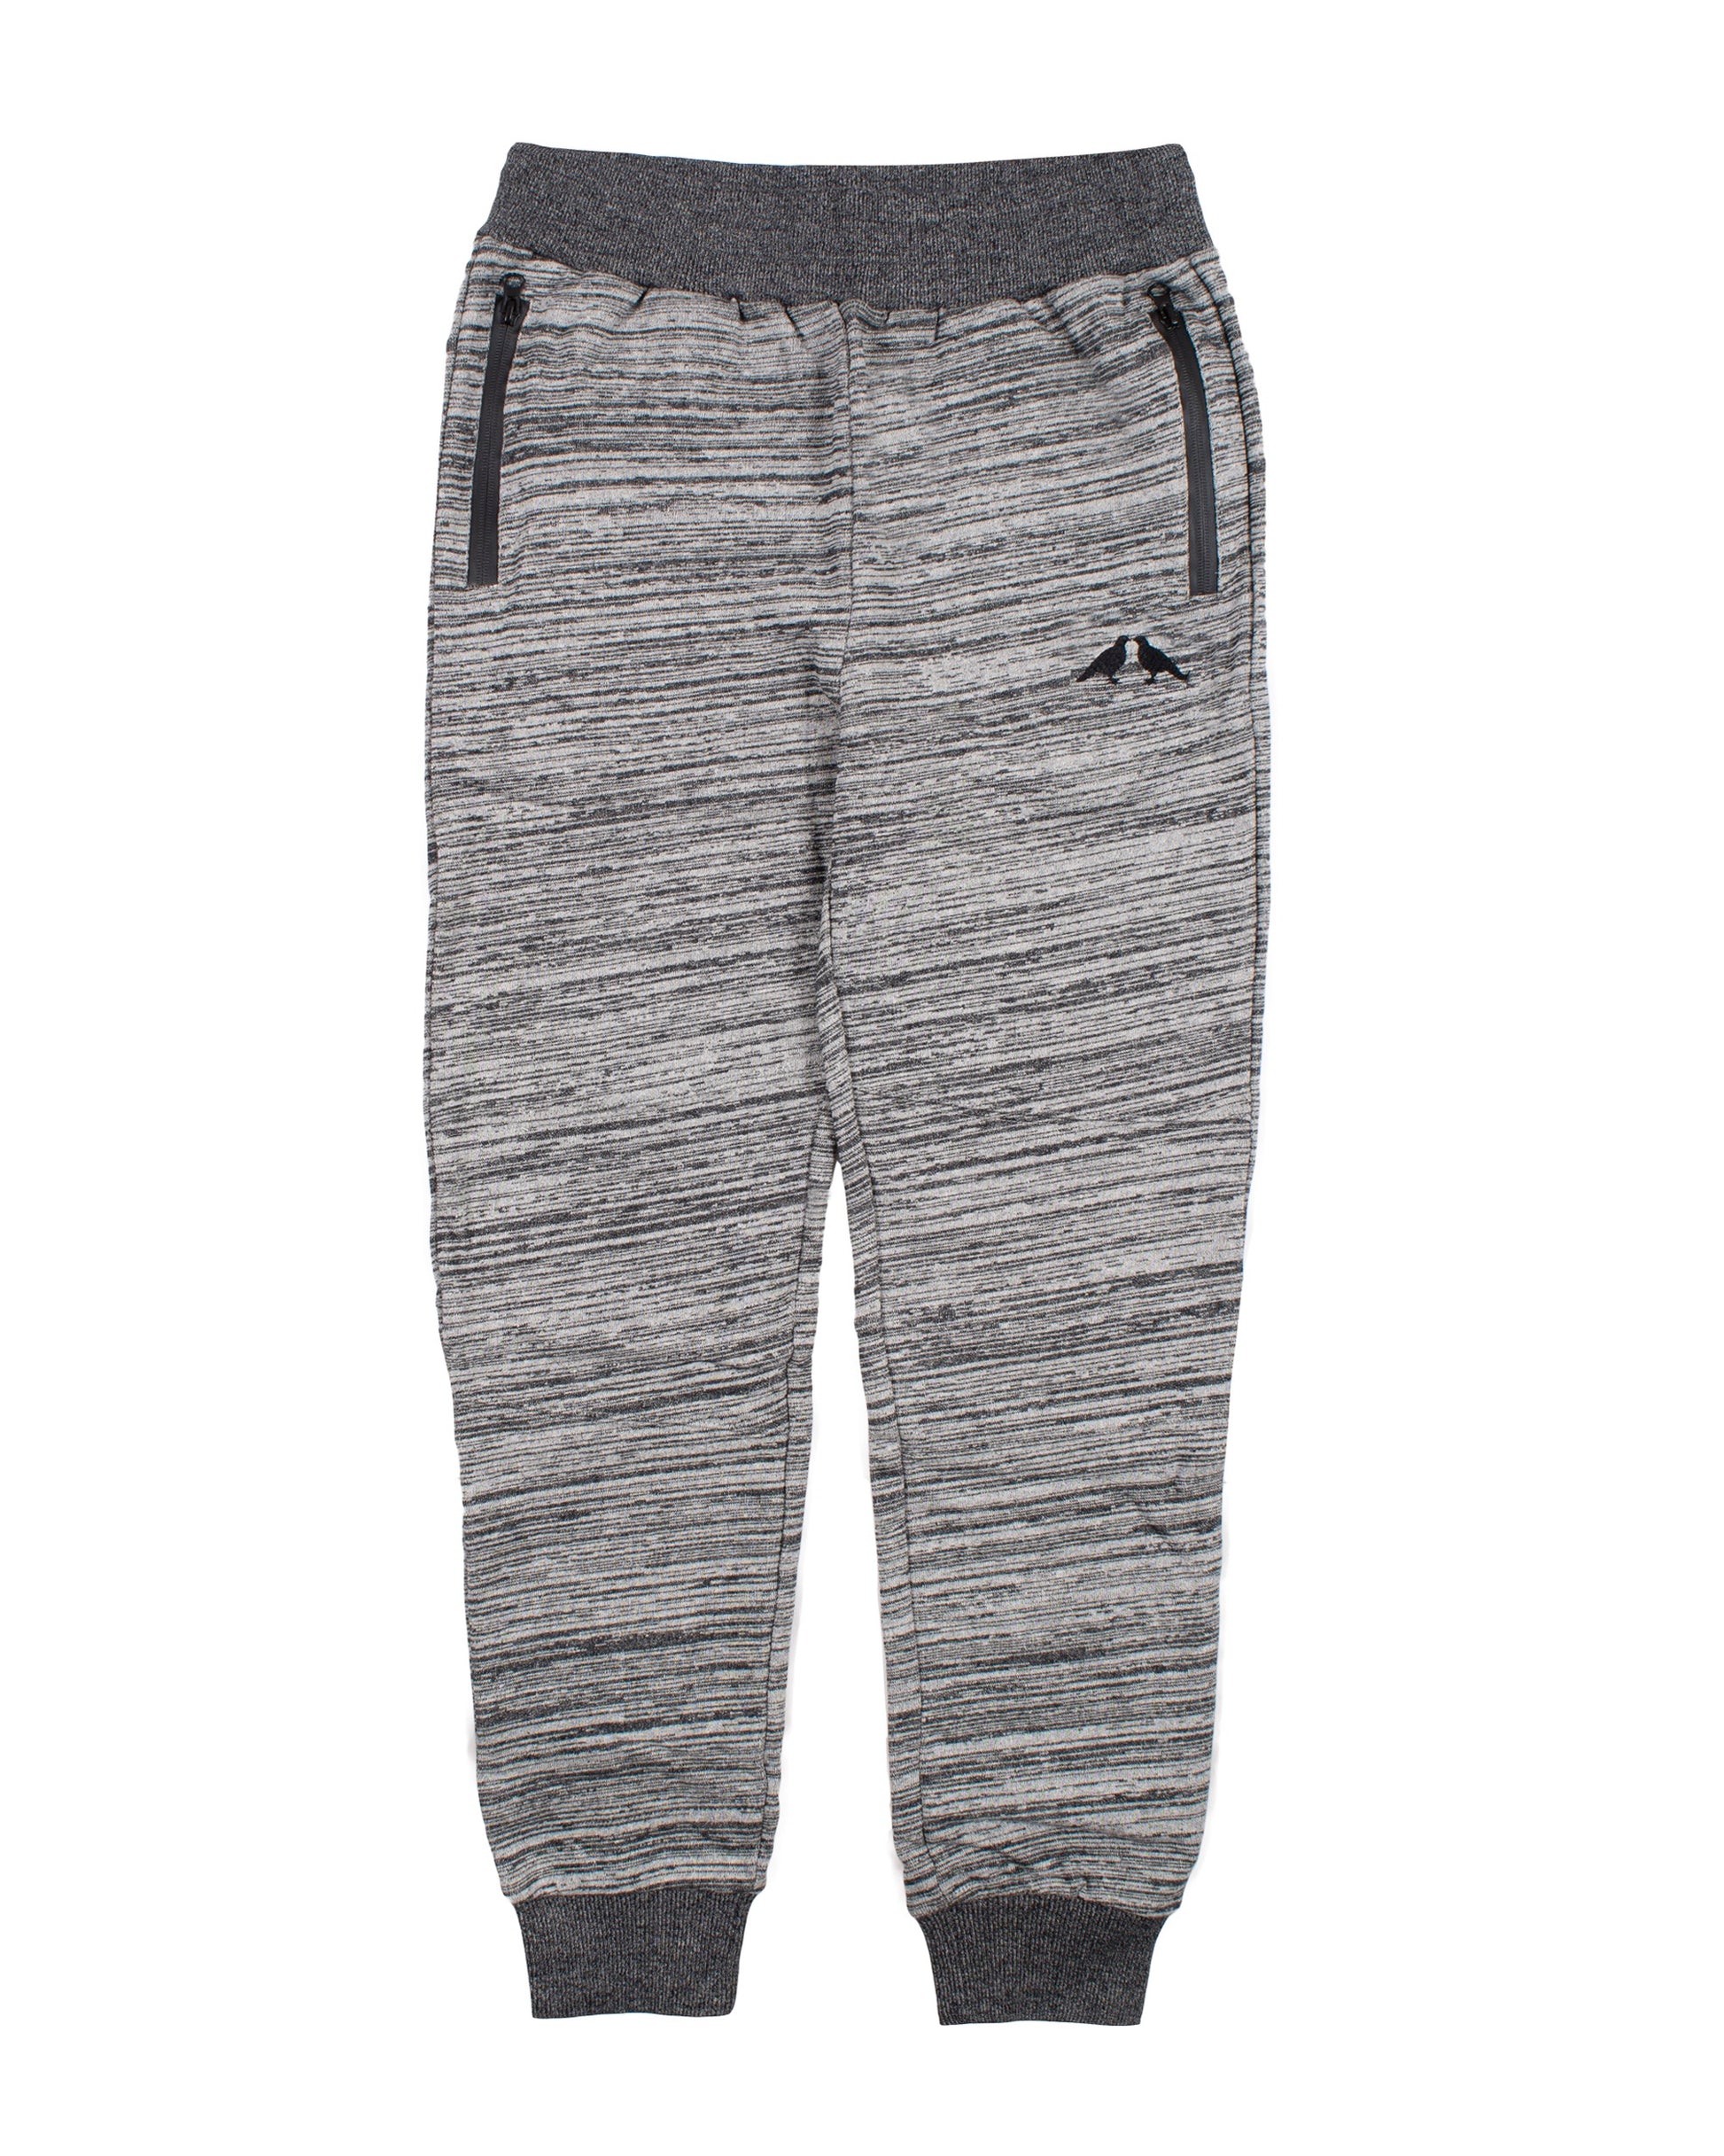 French Terry Sweatpants - Bedstuyfly